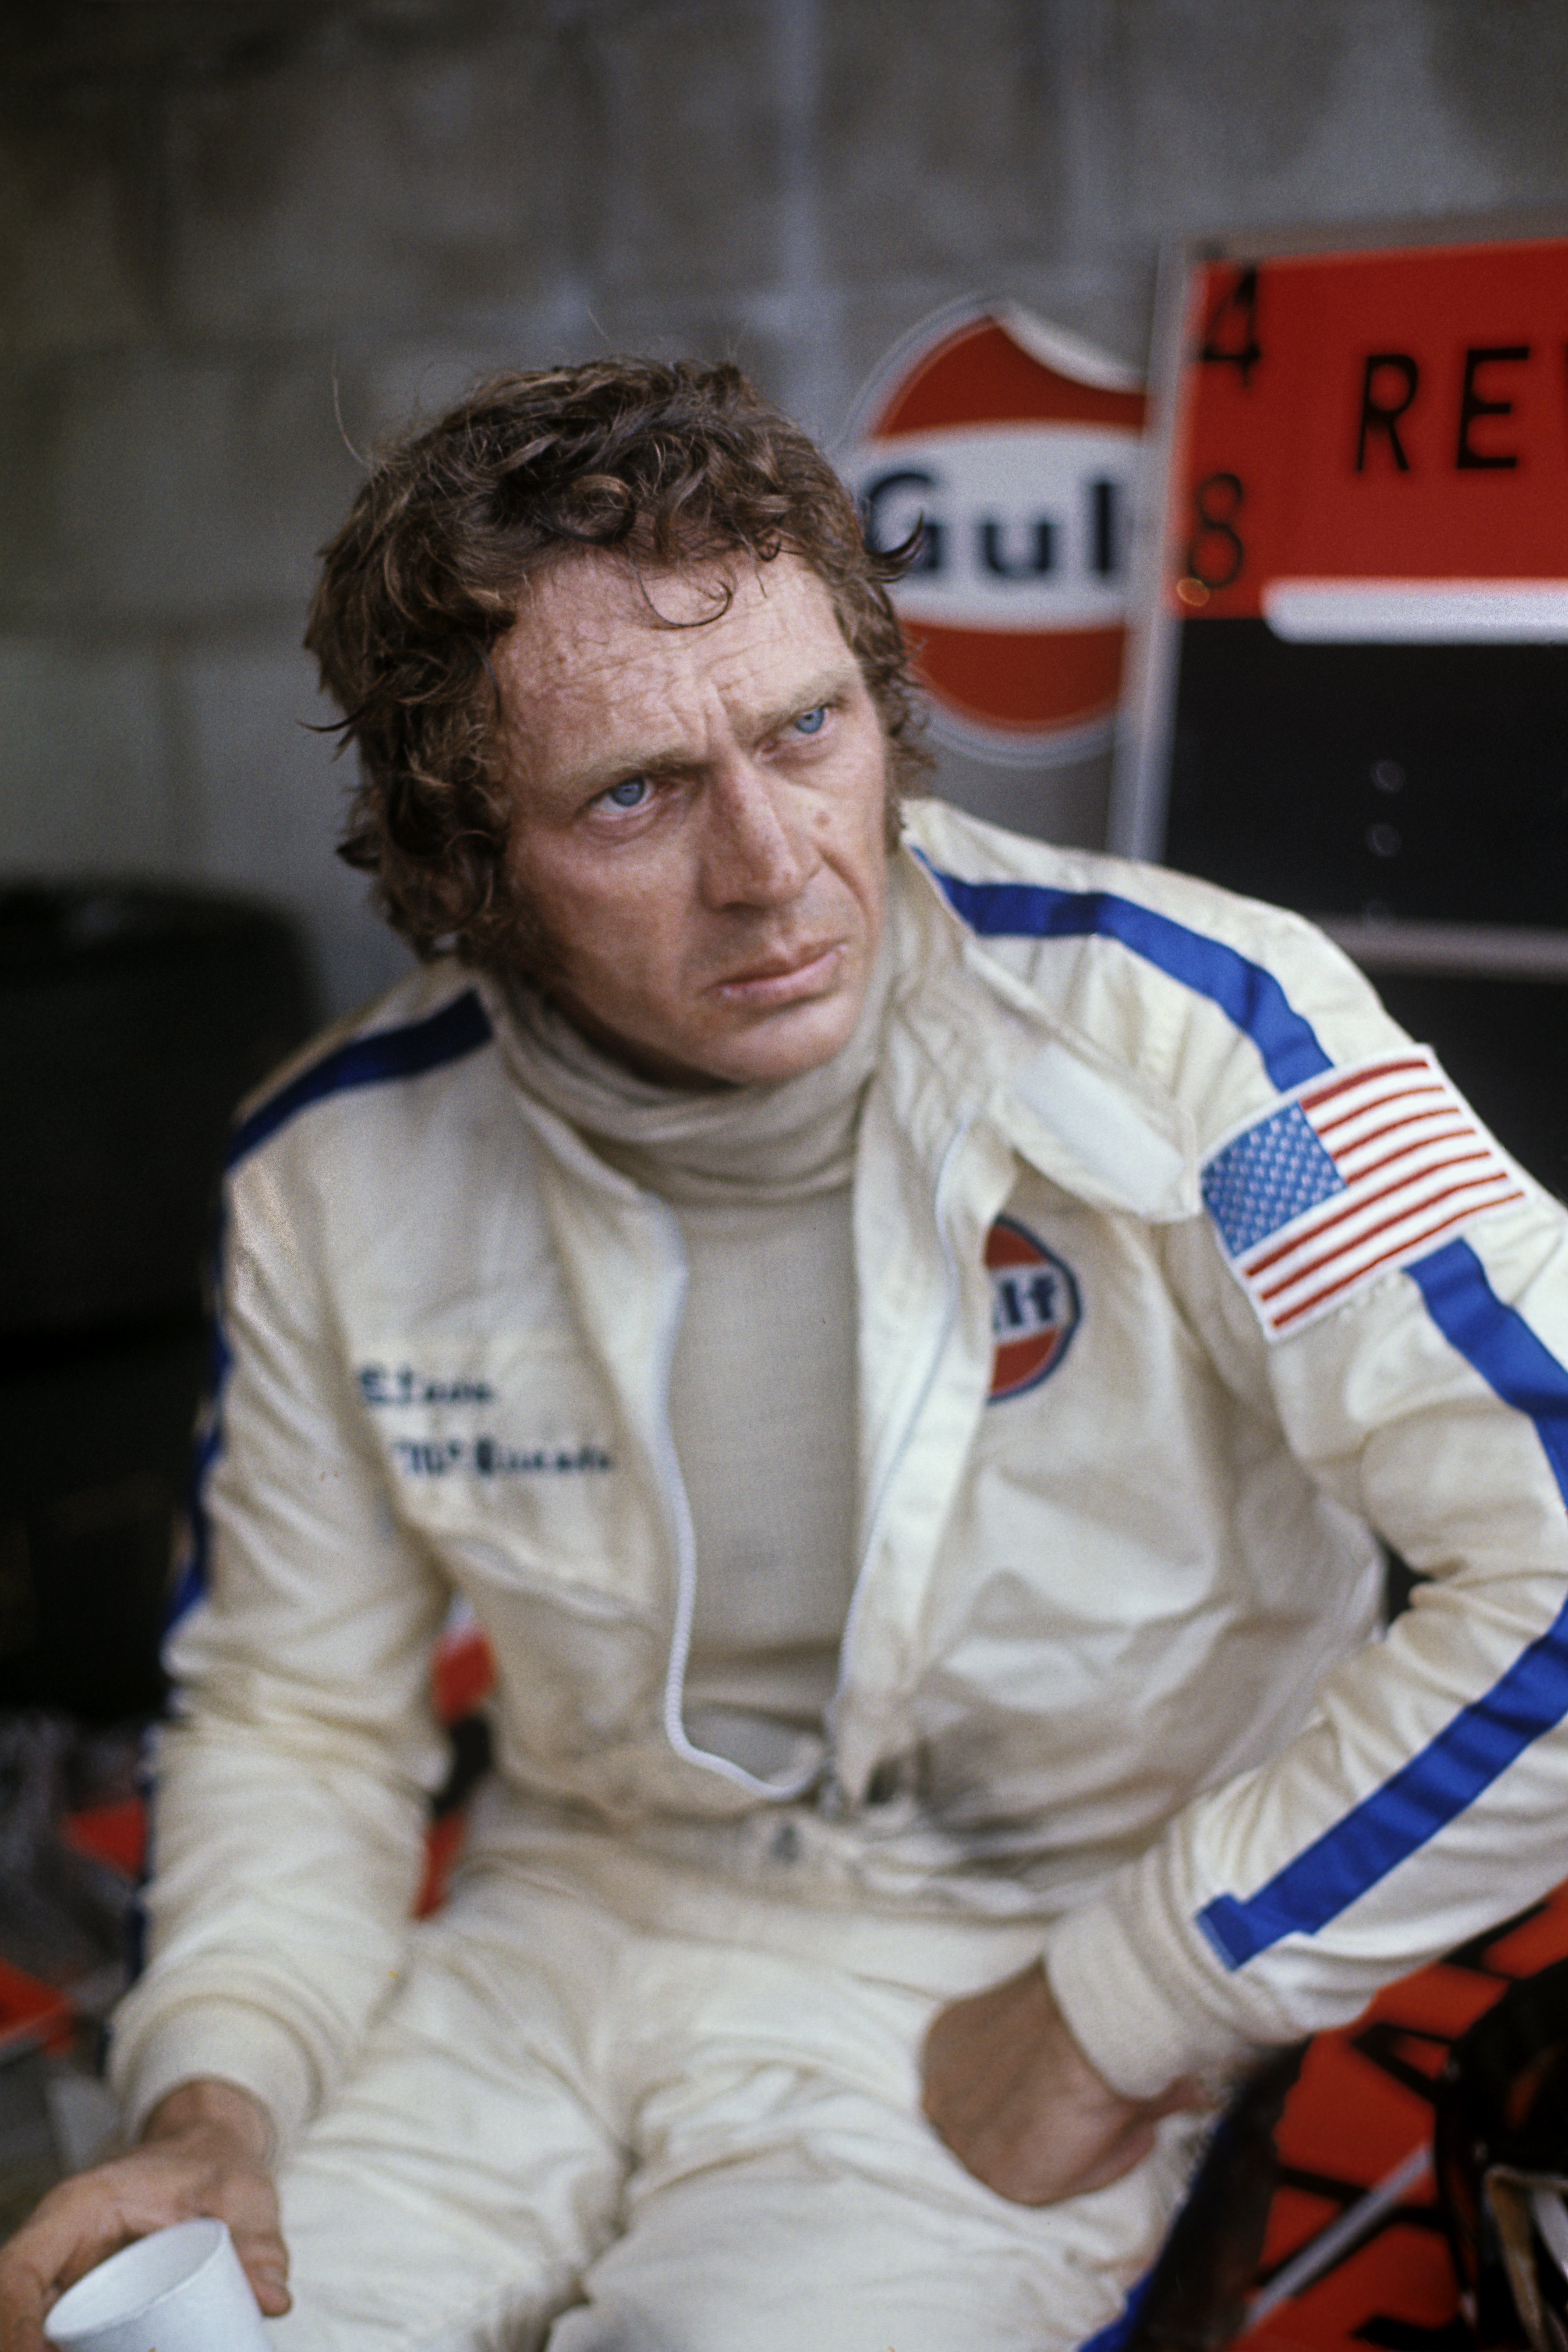 Steve McQueen, 24 Hours of Le Mans, Le Mans, 14 June 1970. Hollywood star Steve McQueen during the shooting of his film "Le Mans". | Source: Getty Images